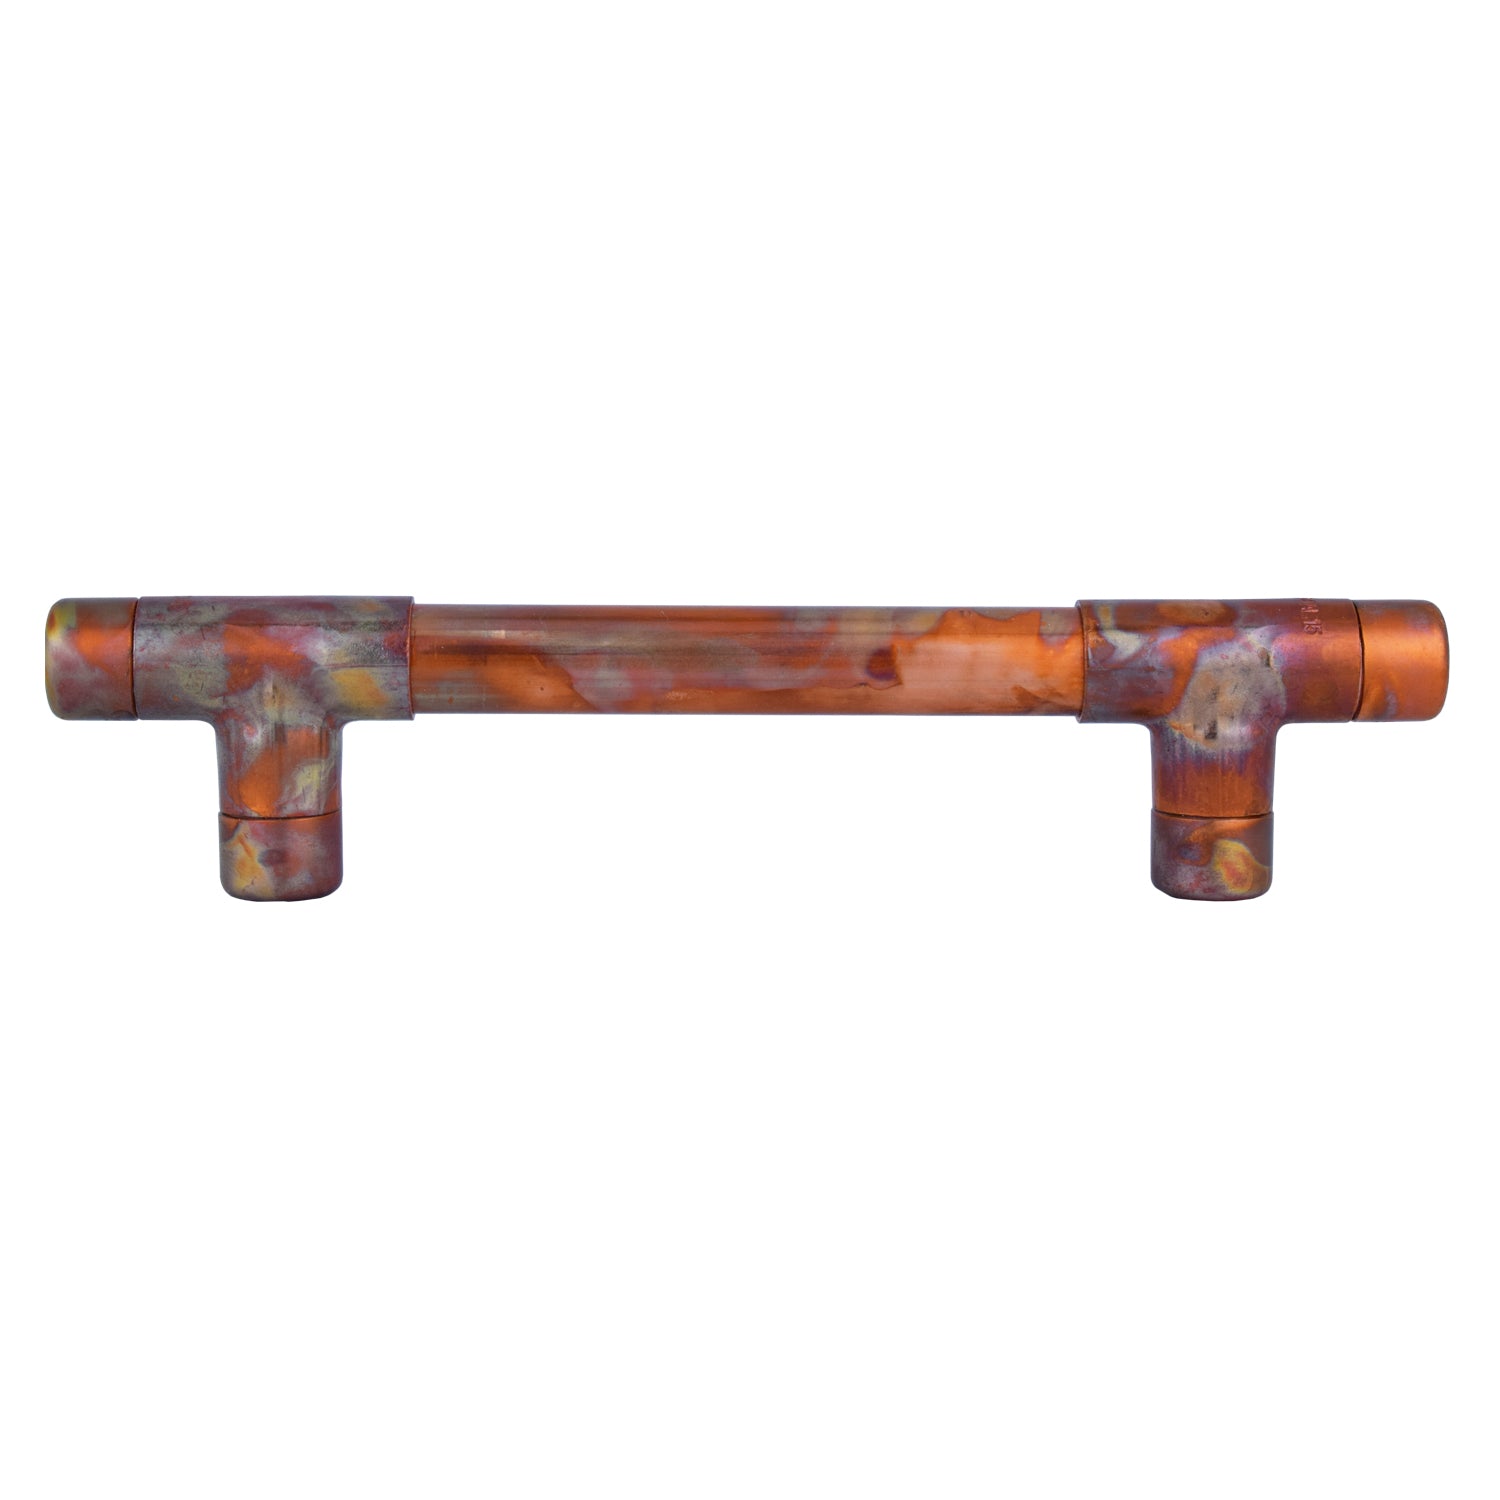 Copper Handle - Marbled - T-shaped - On plain white background